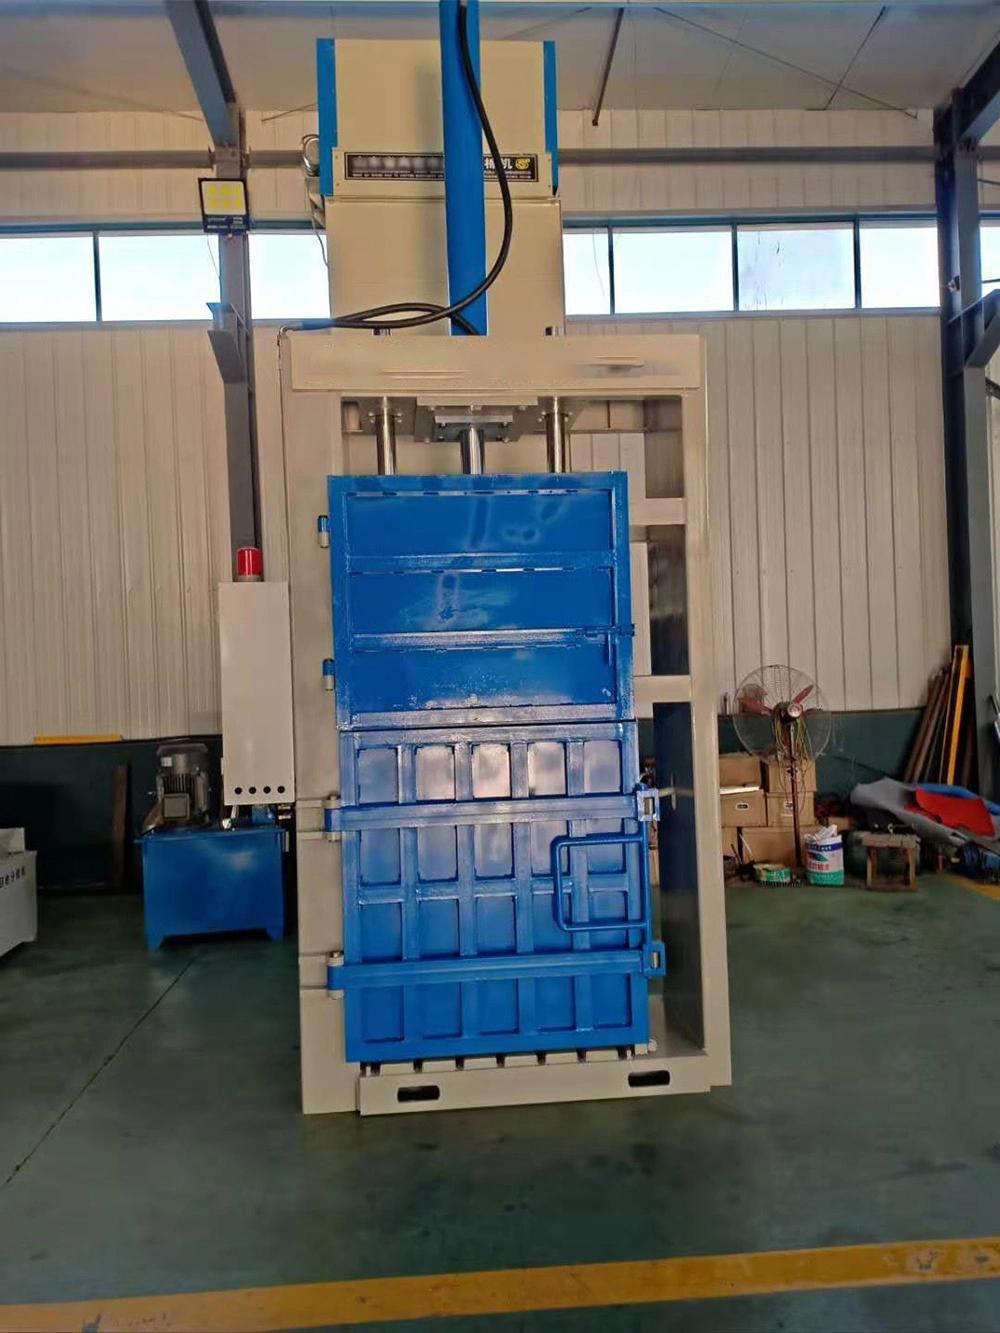 Hot-Selling High-Quality Waste Paper Automatic Baler Waste Paper Box, Corrugated Box, Plastic Film and Other Automatic Baler